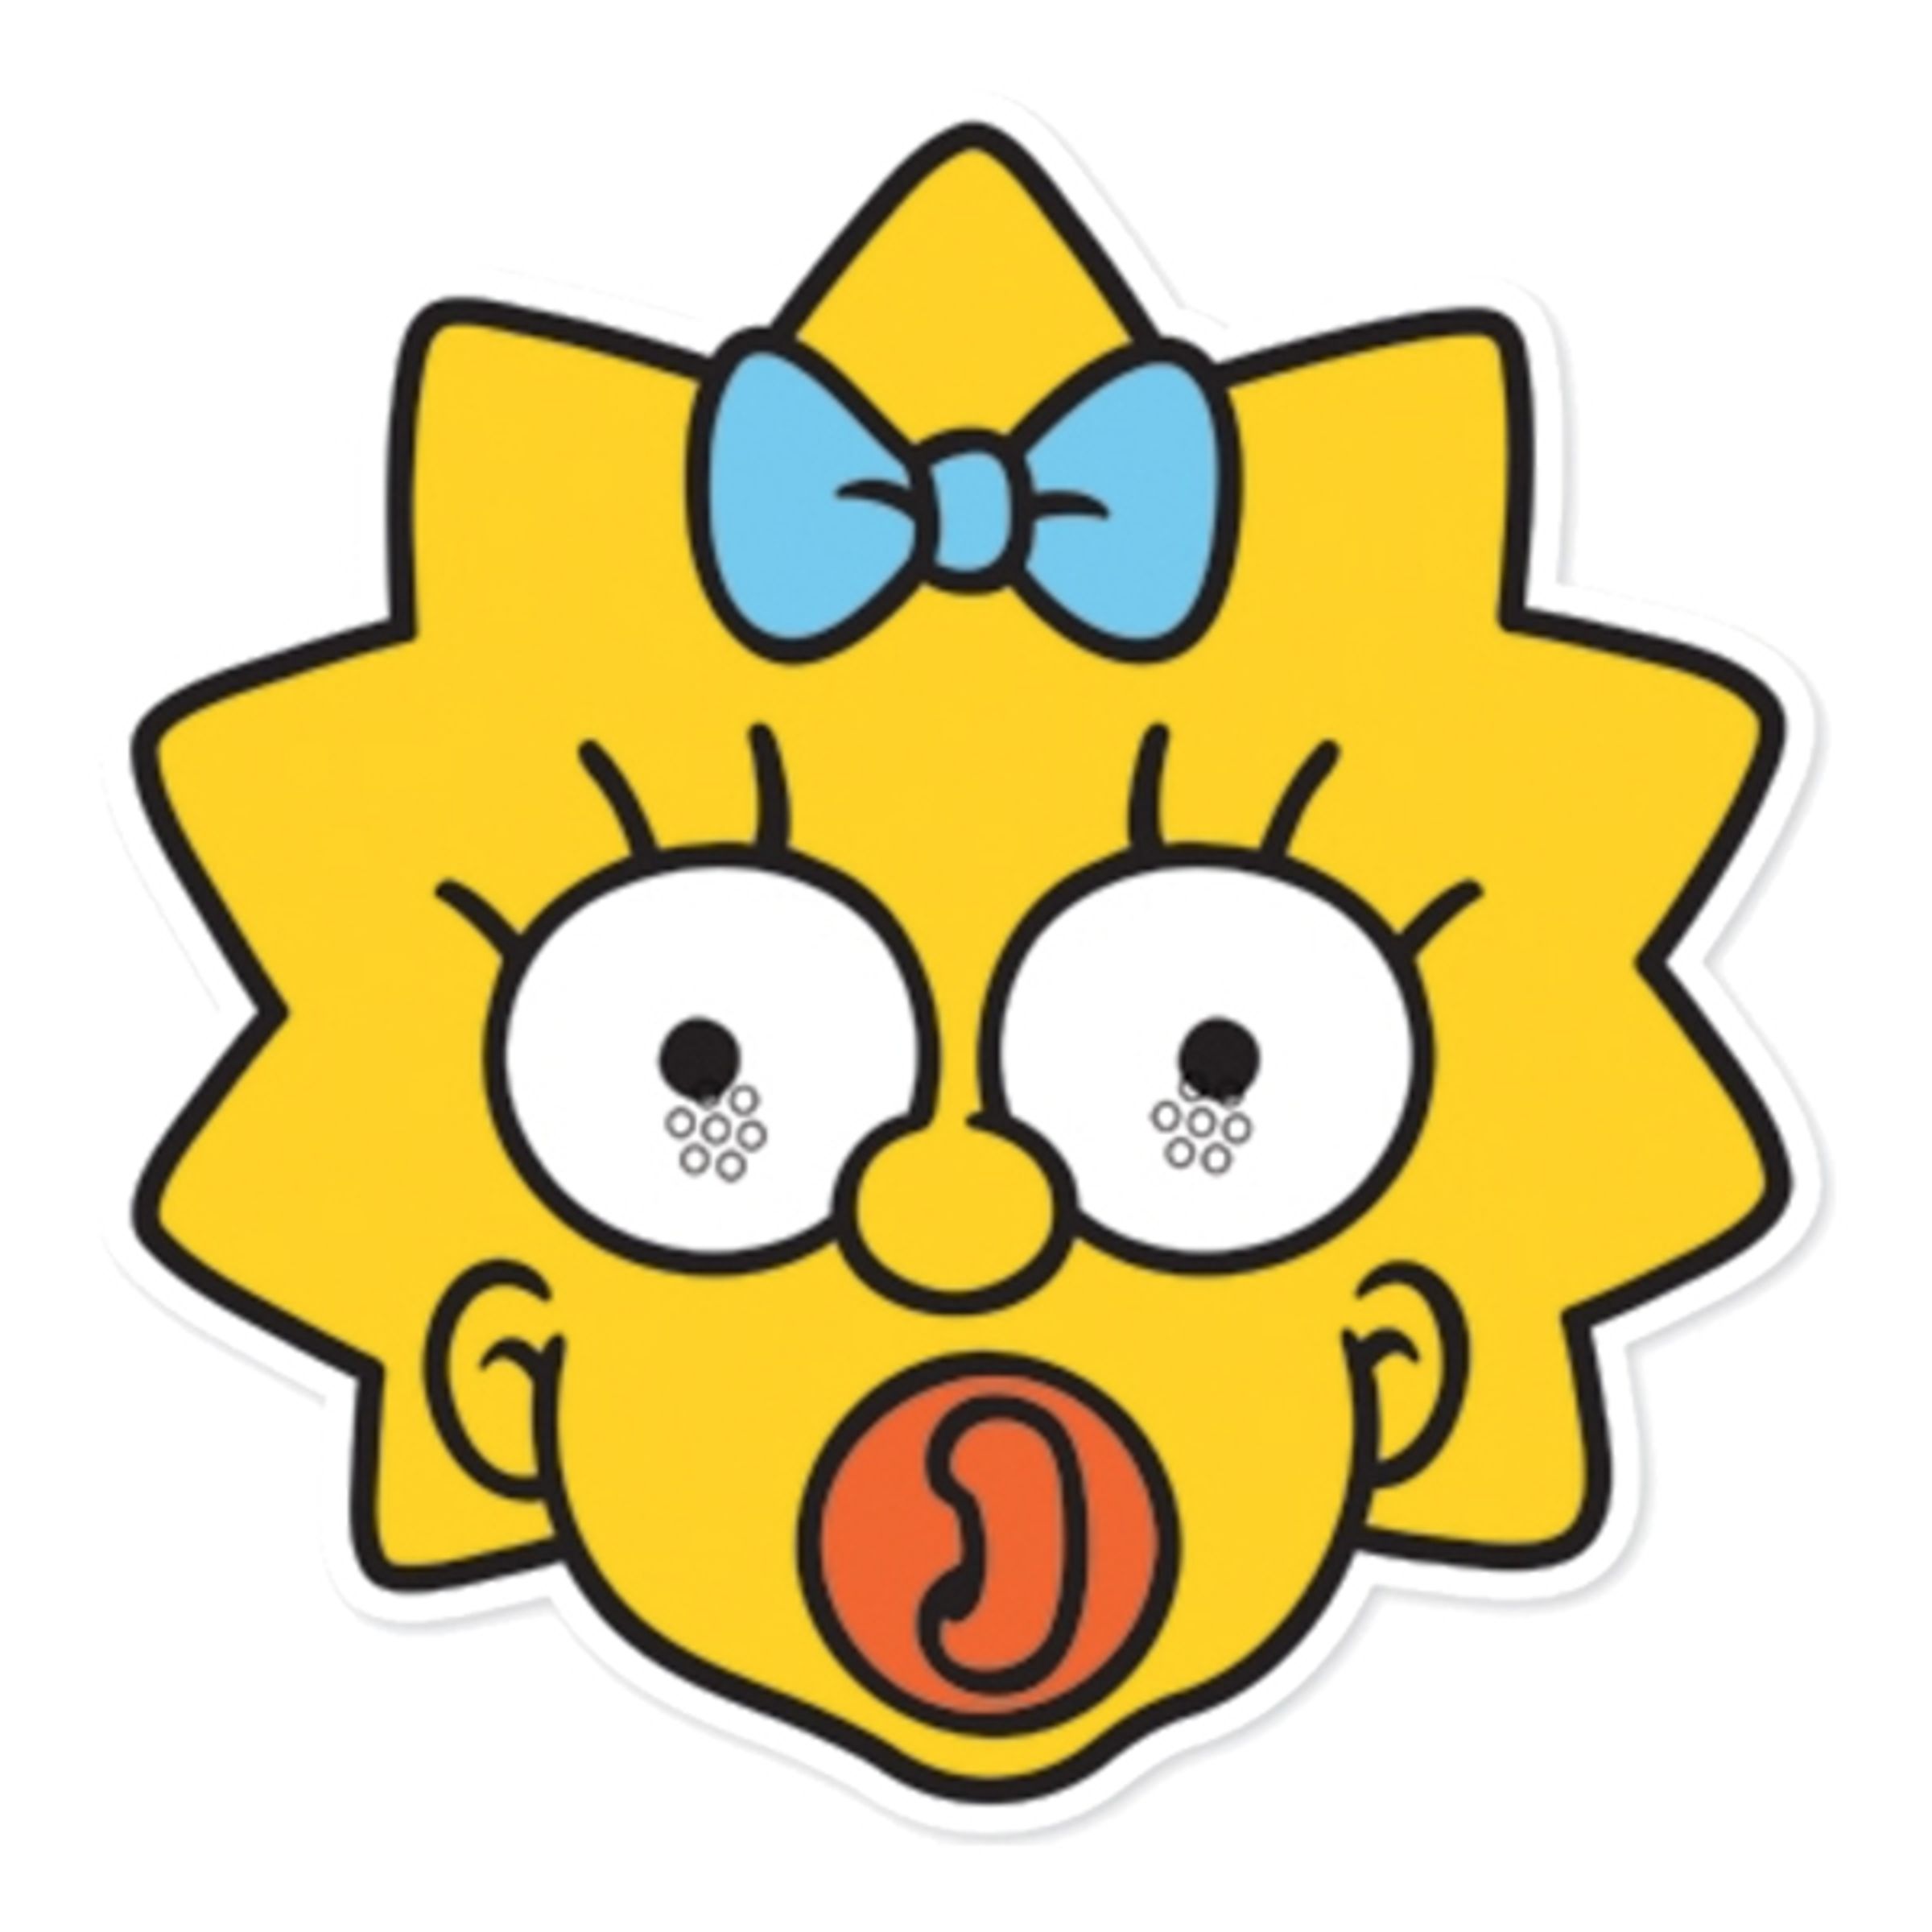 Maggie Simpson Pappmask - 1-pack